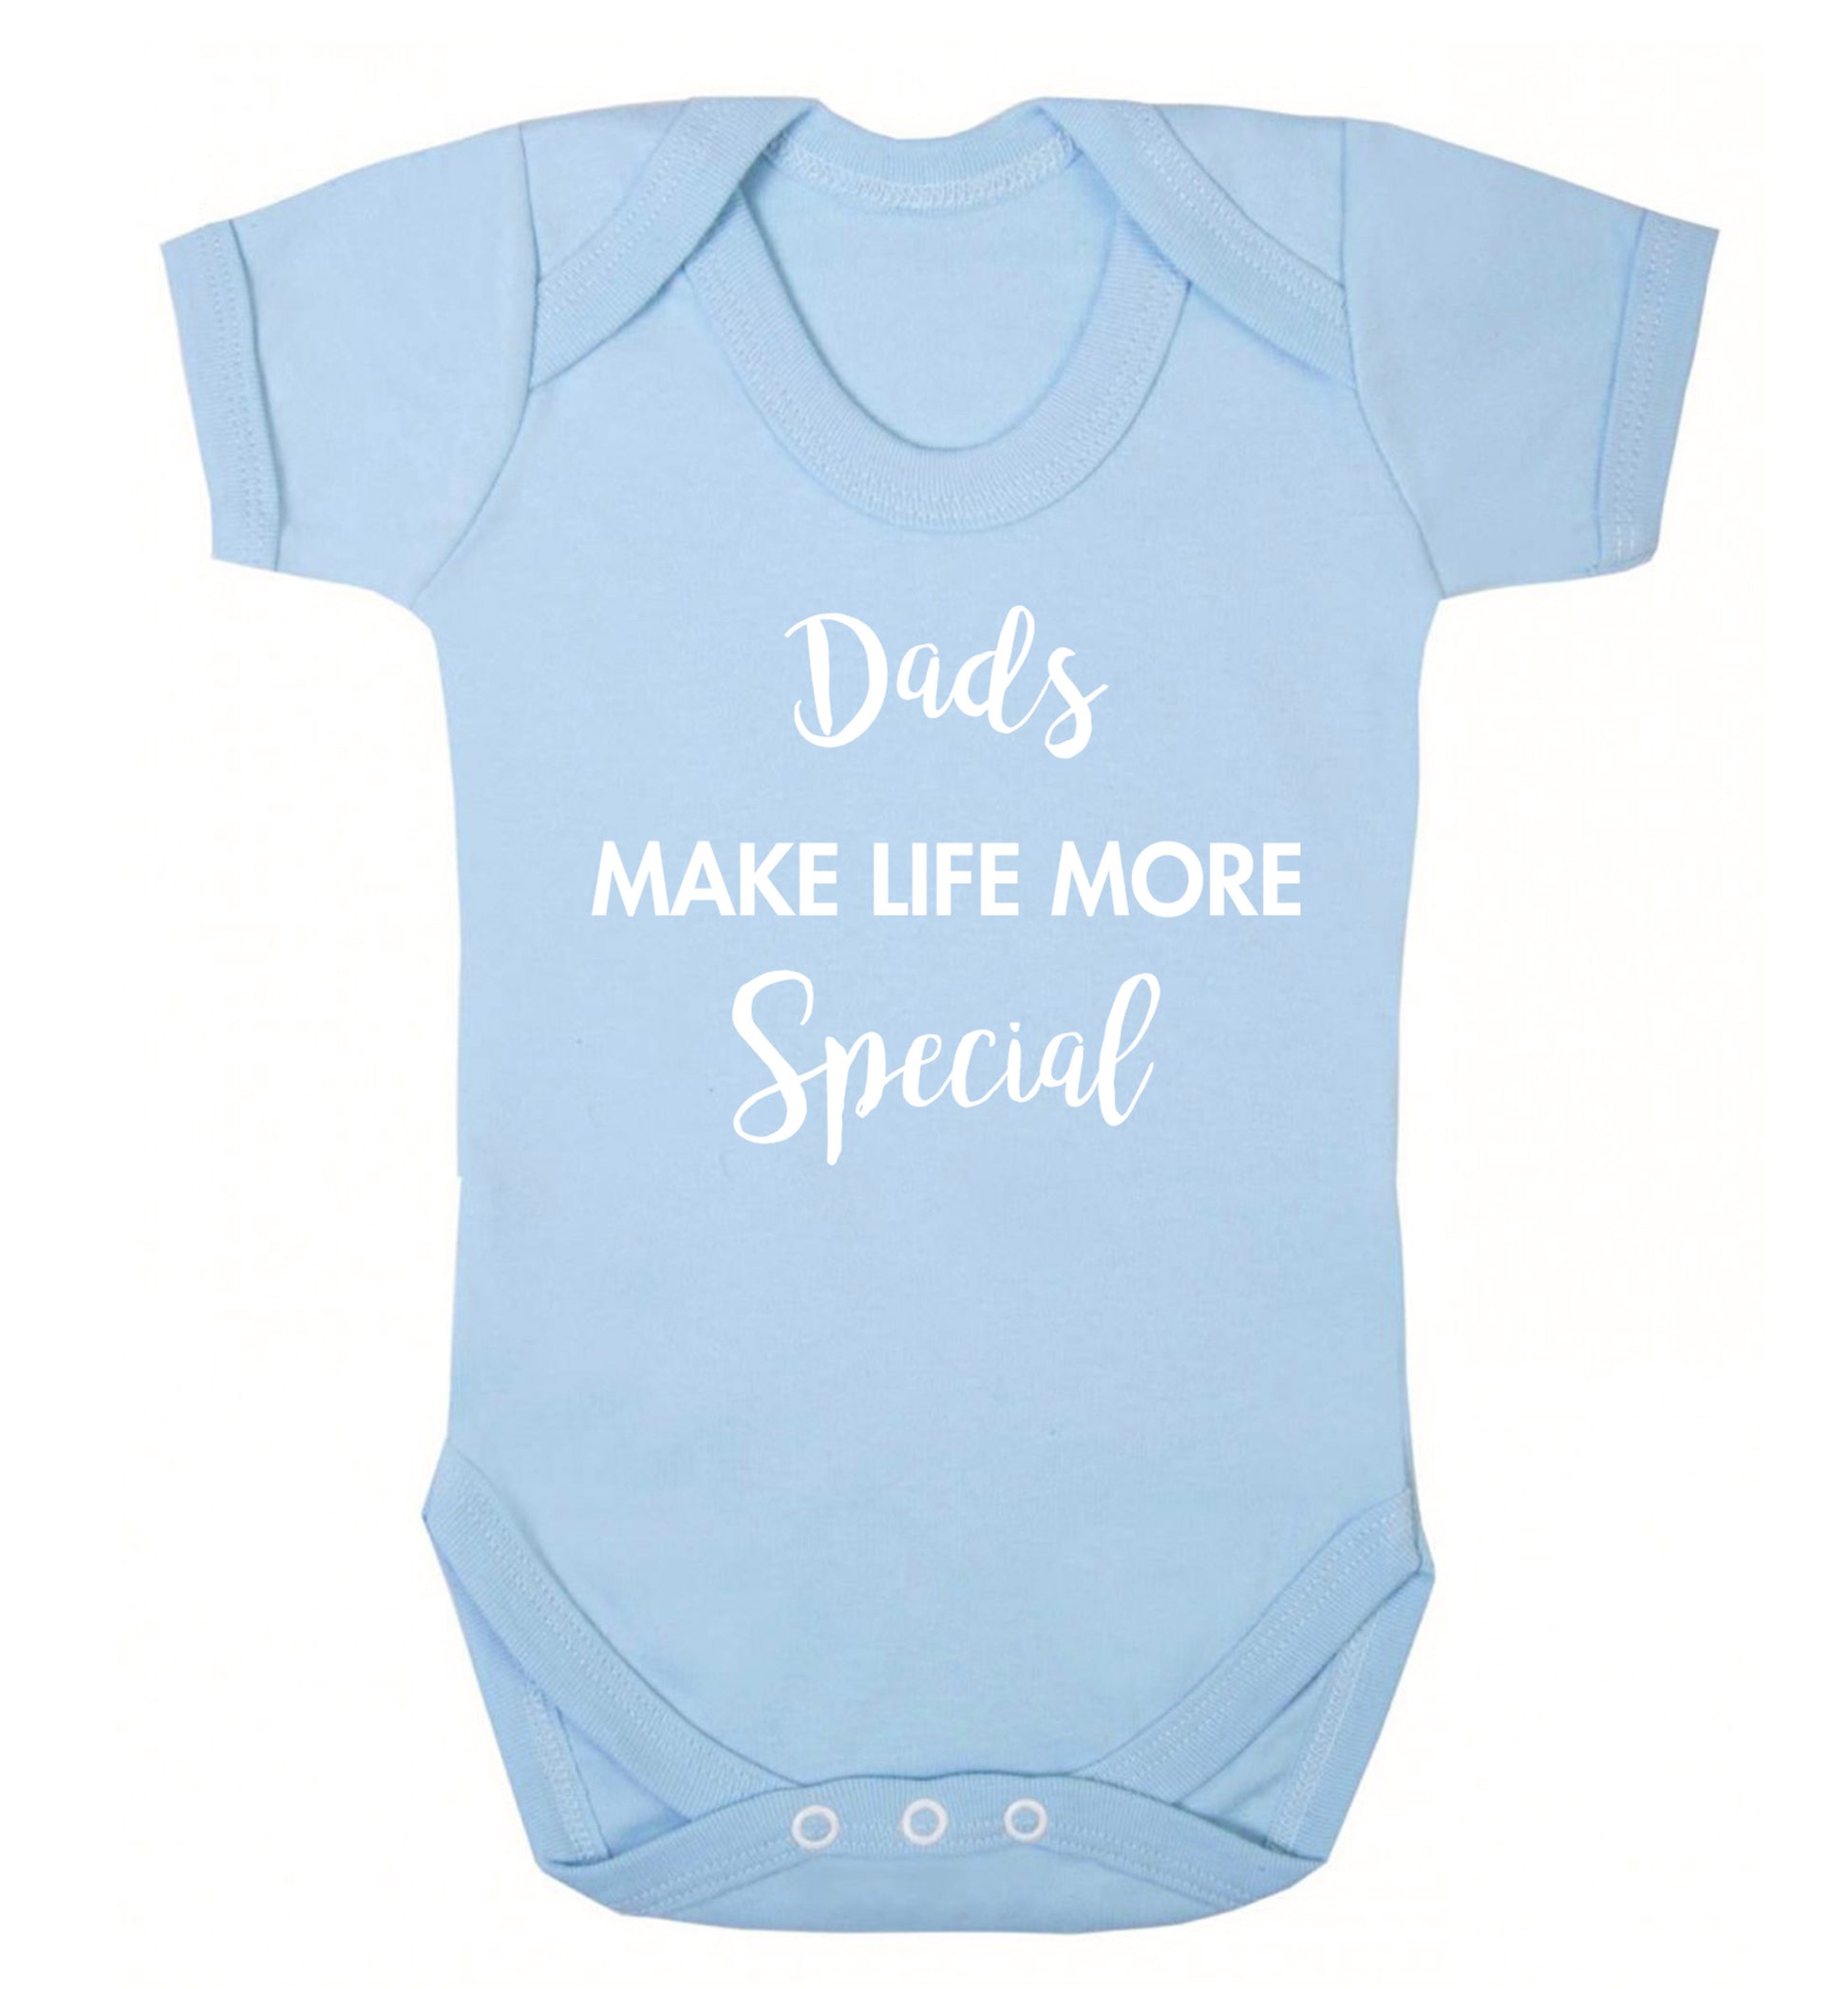 Dads make life more special Baby Vest pale blue 18-24 months